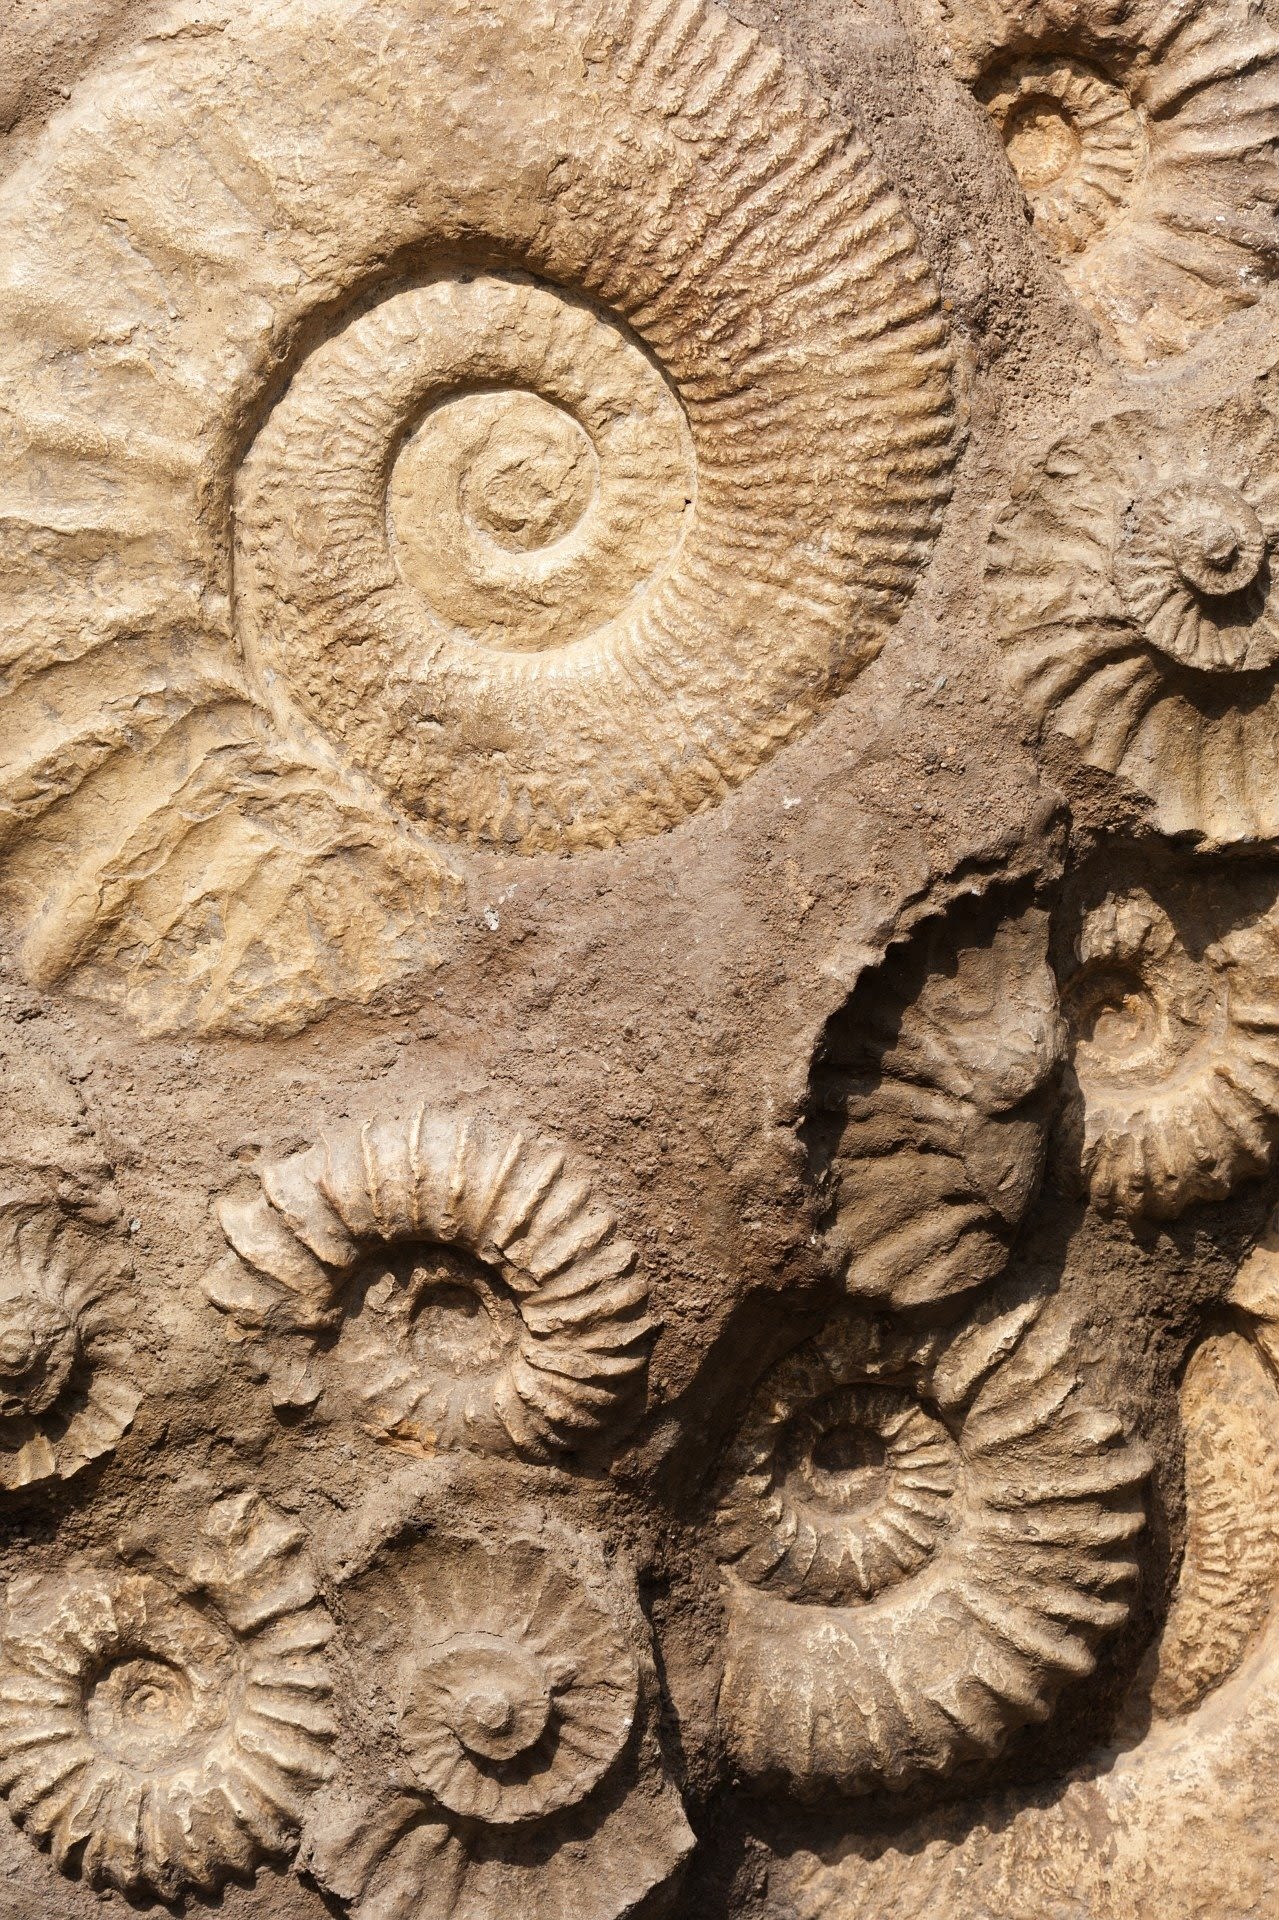 The fossils being formed today will show how humankind disrupted life on Earth